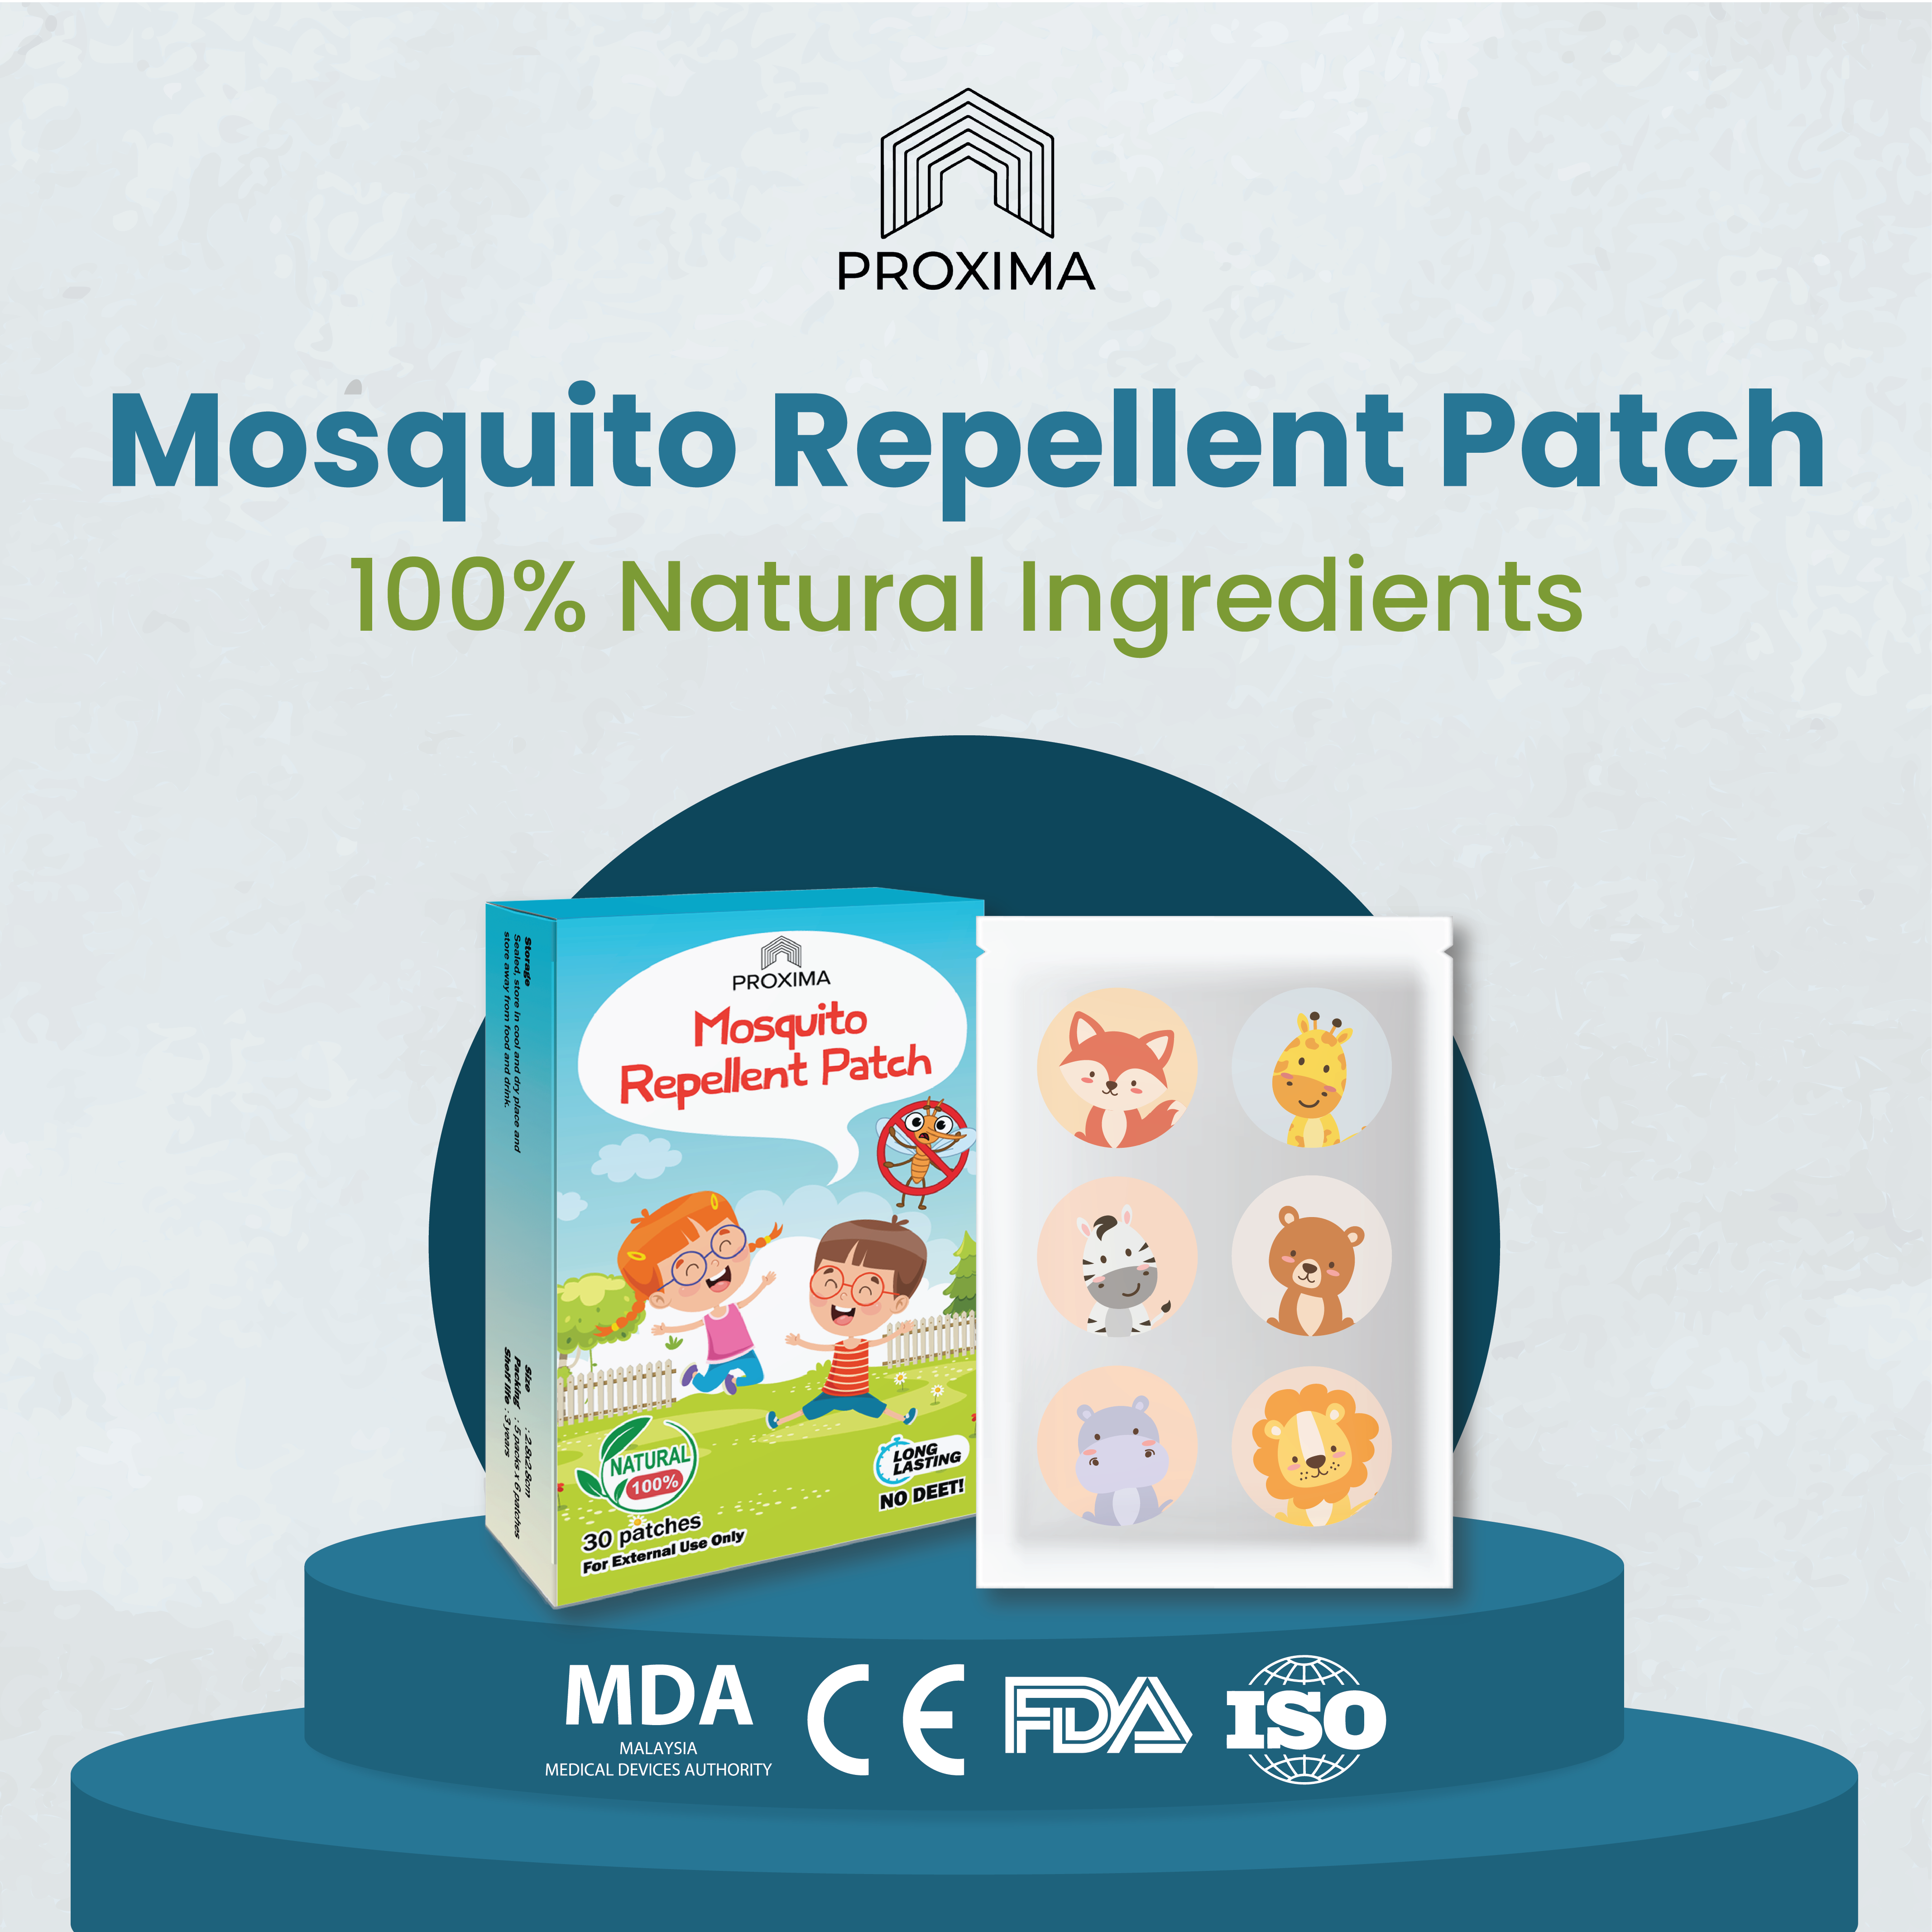 Mosquito Repellent Patch Shopee Posting LATEST-03